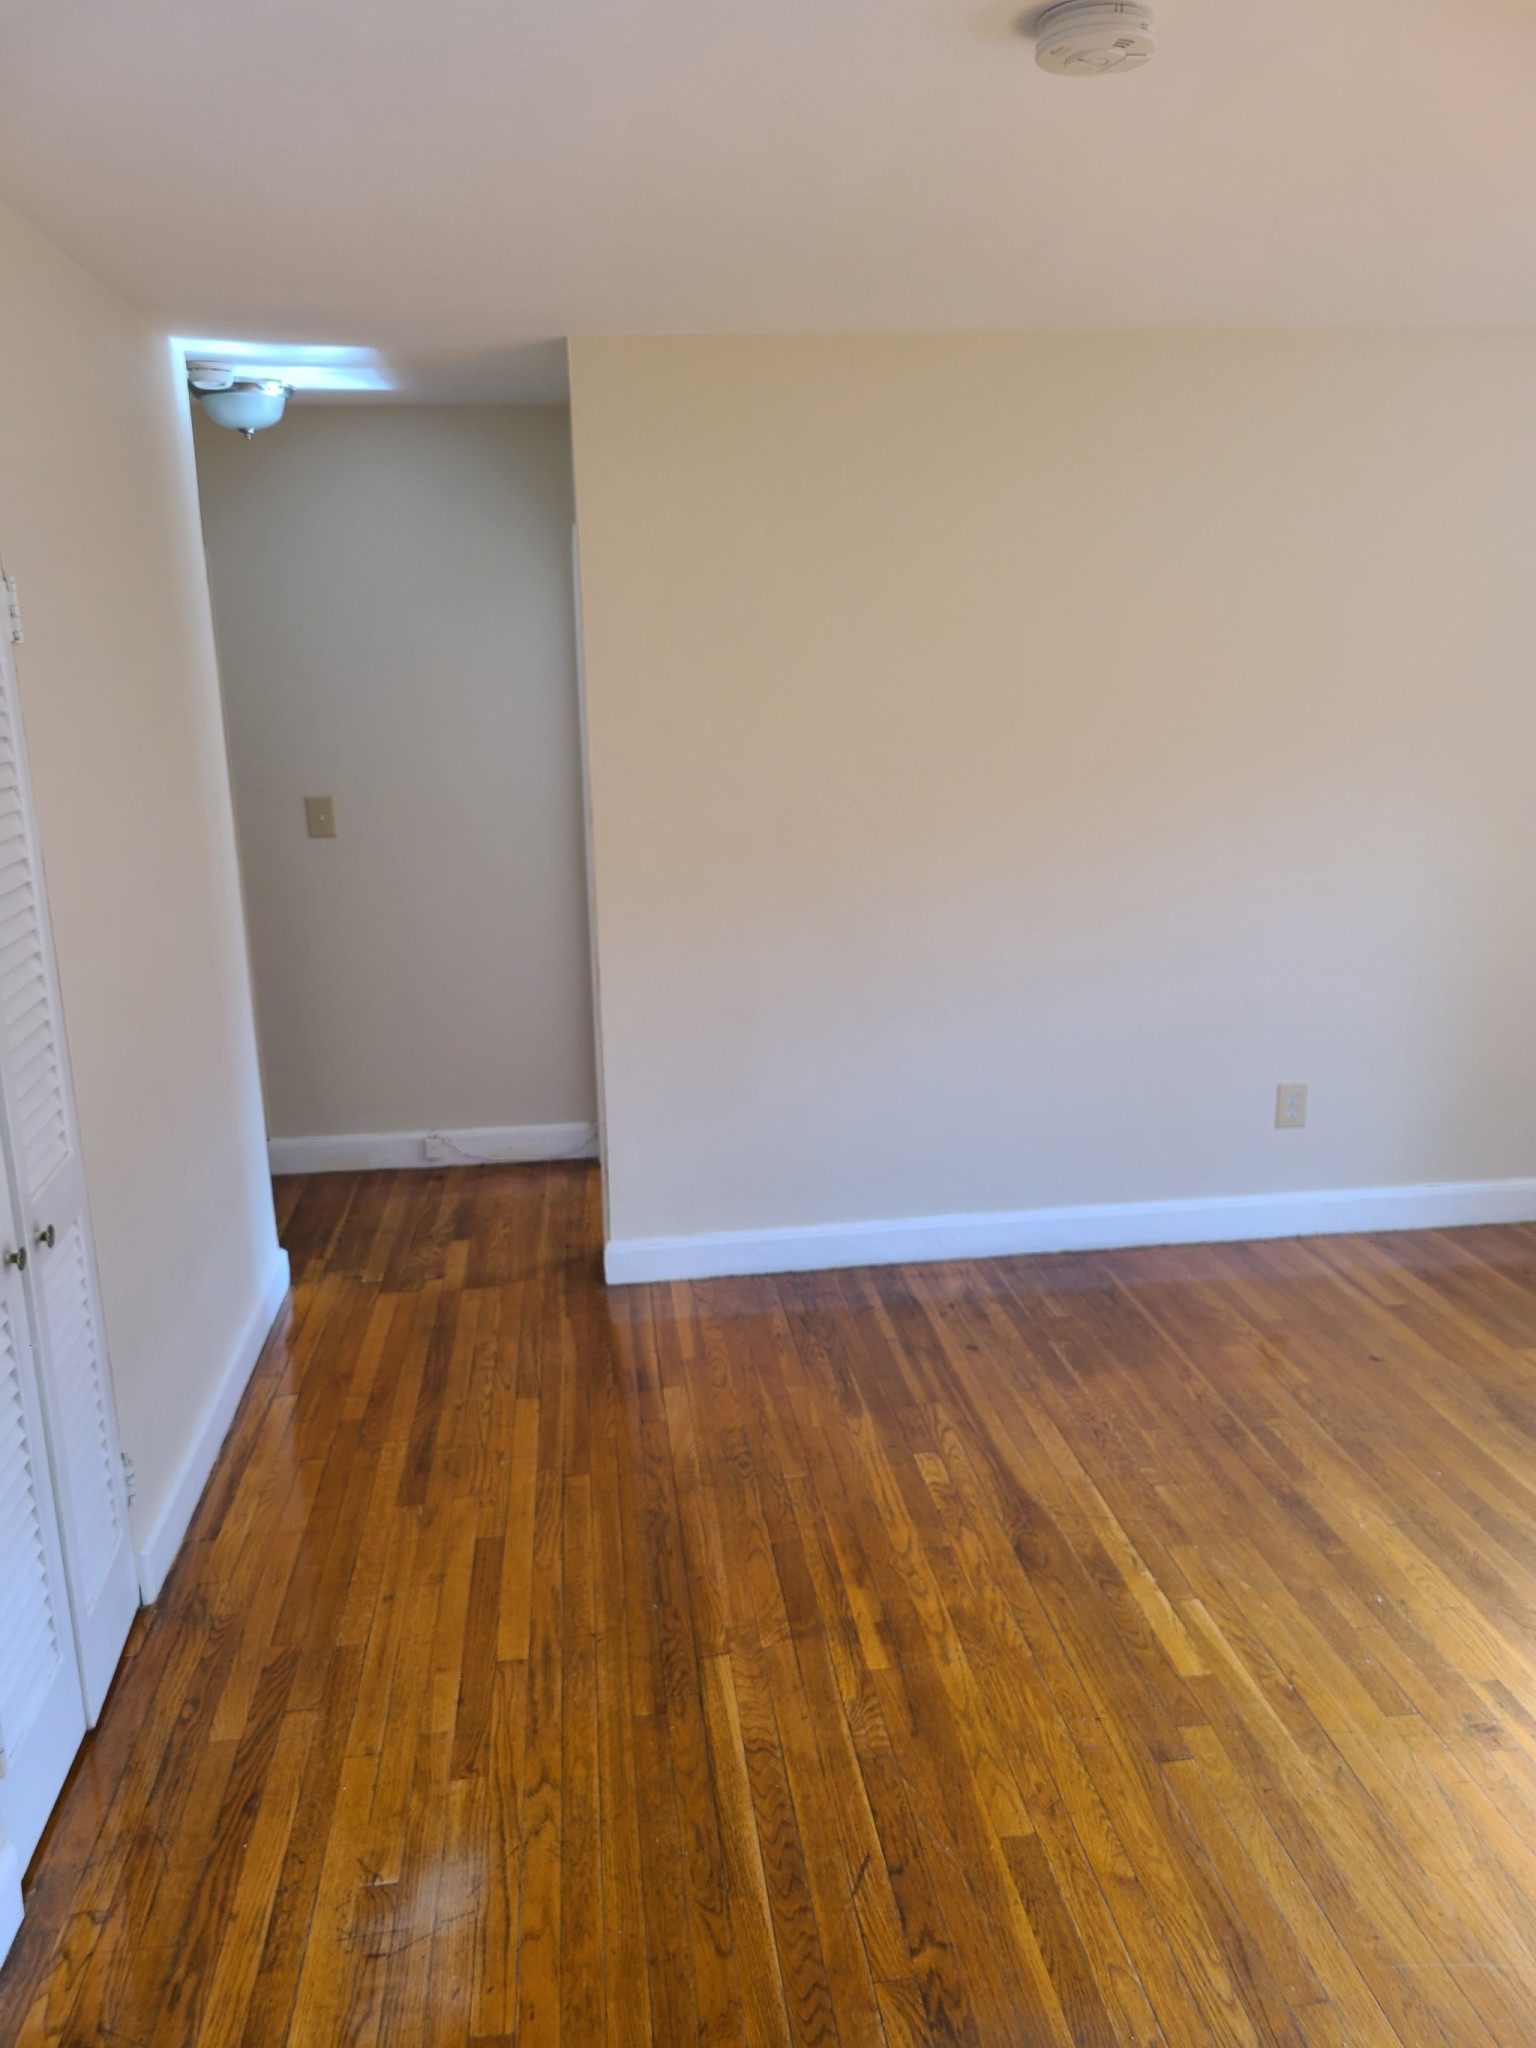 Photos of apartment on Chiswick Rd.,Boston MA 02134